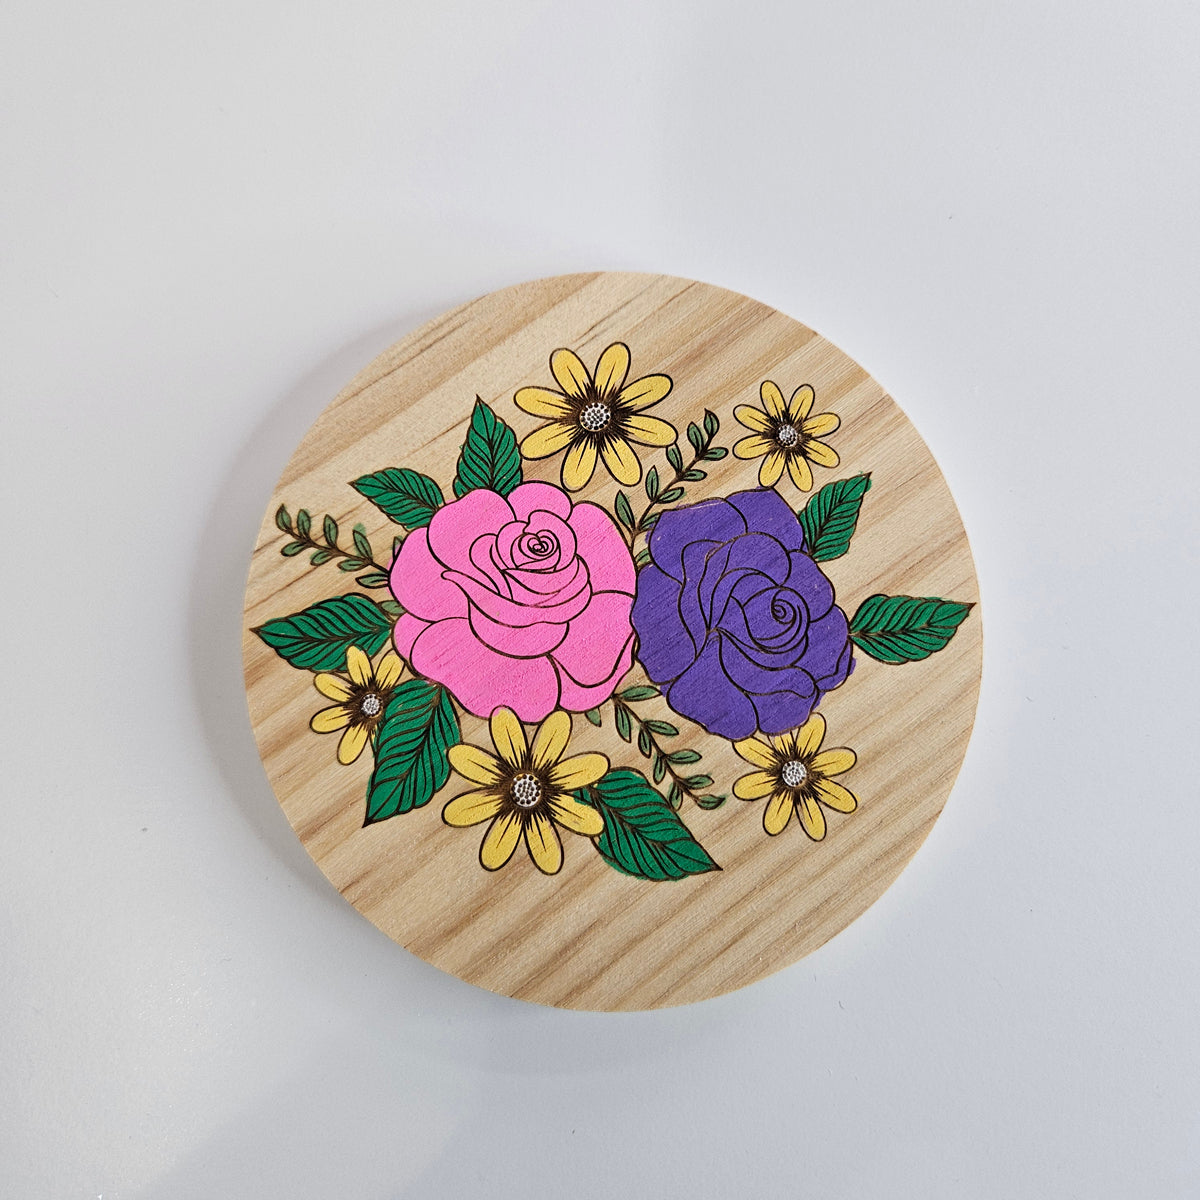 Round Wooden Coasters: Roses - Set of 4